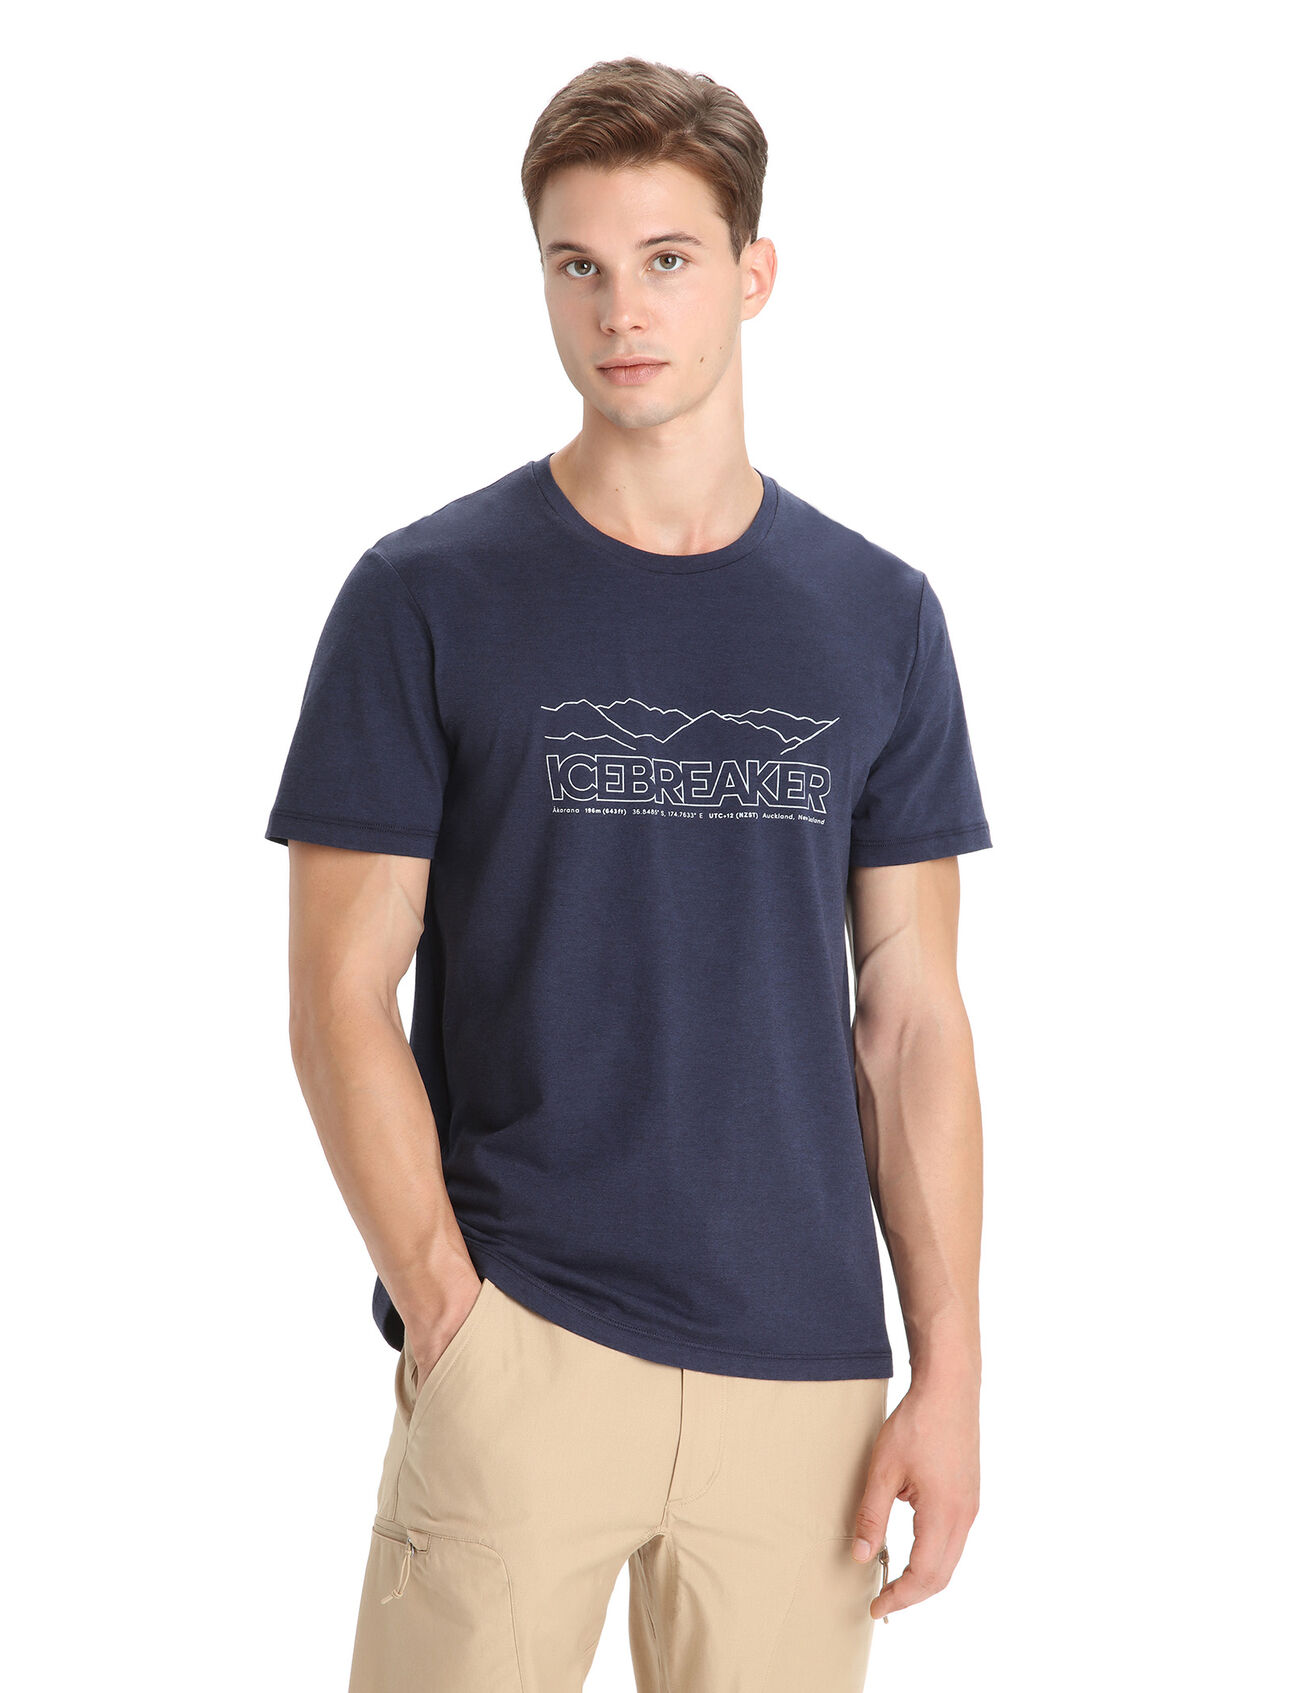 Mens Merino Central Classic Short Sleeve T-Shirt Icebreaker Story A clean, classic and comfortable everyday tee that blends natural merino wool with organic cotton, the Central Classic Short Sleeve Tee Icebreaker Story has you covered any day of the week.